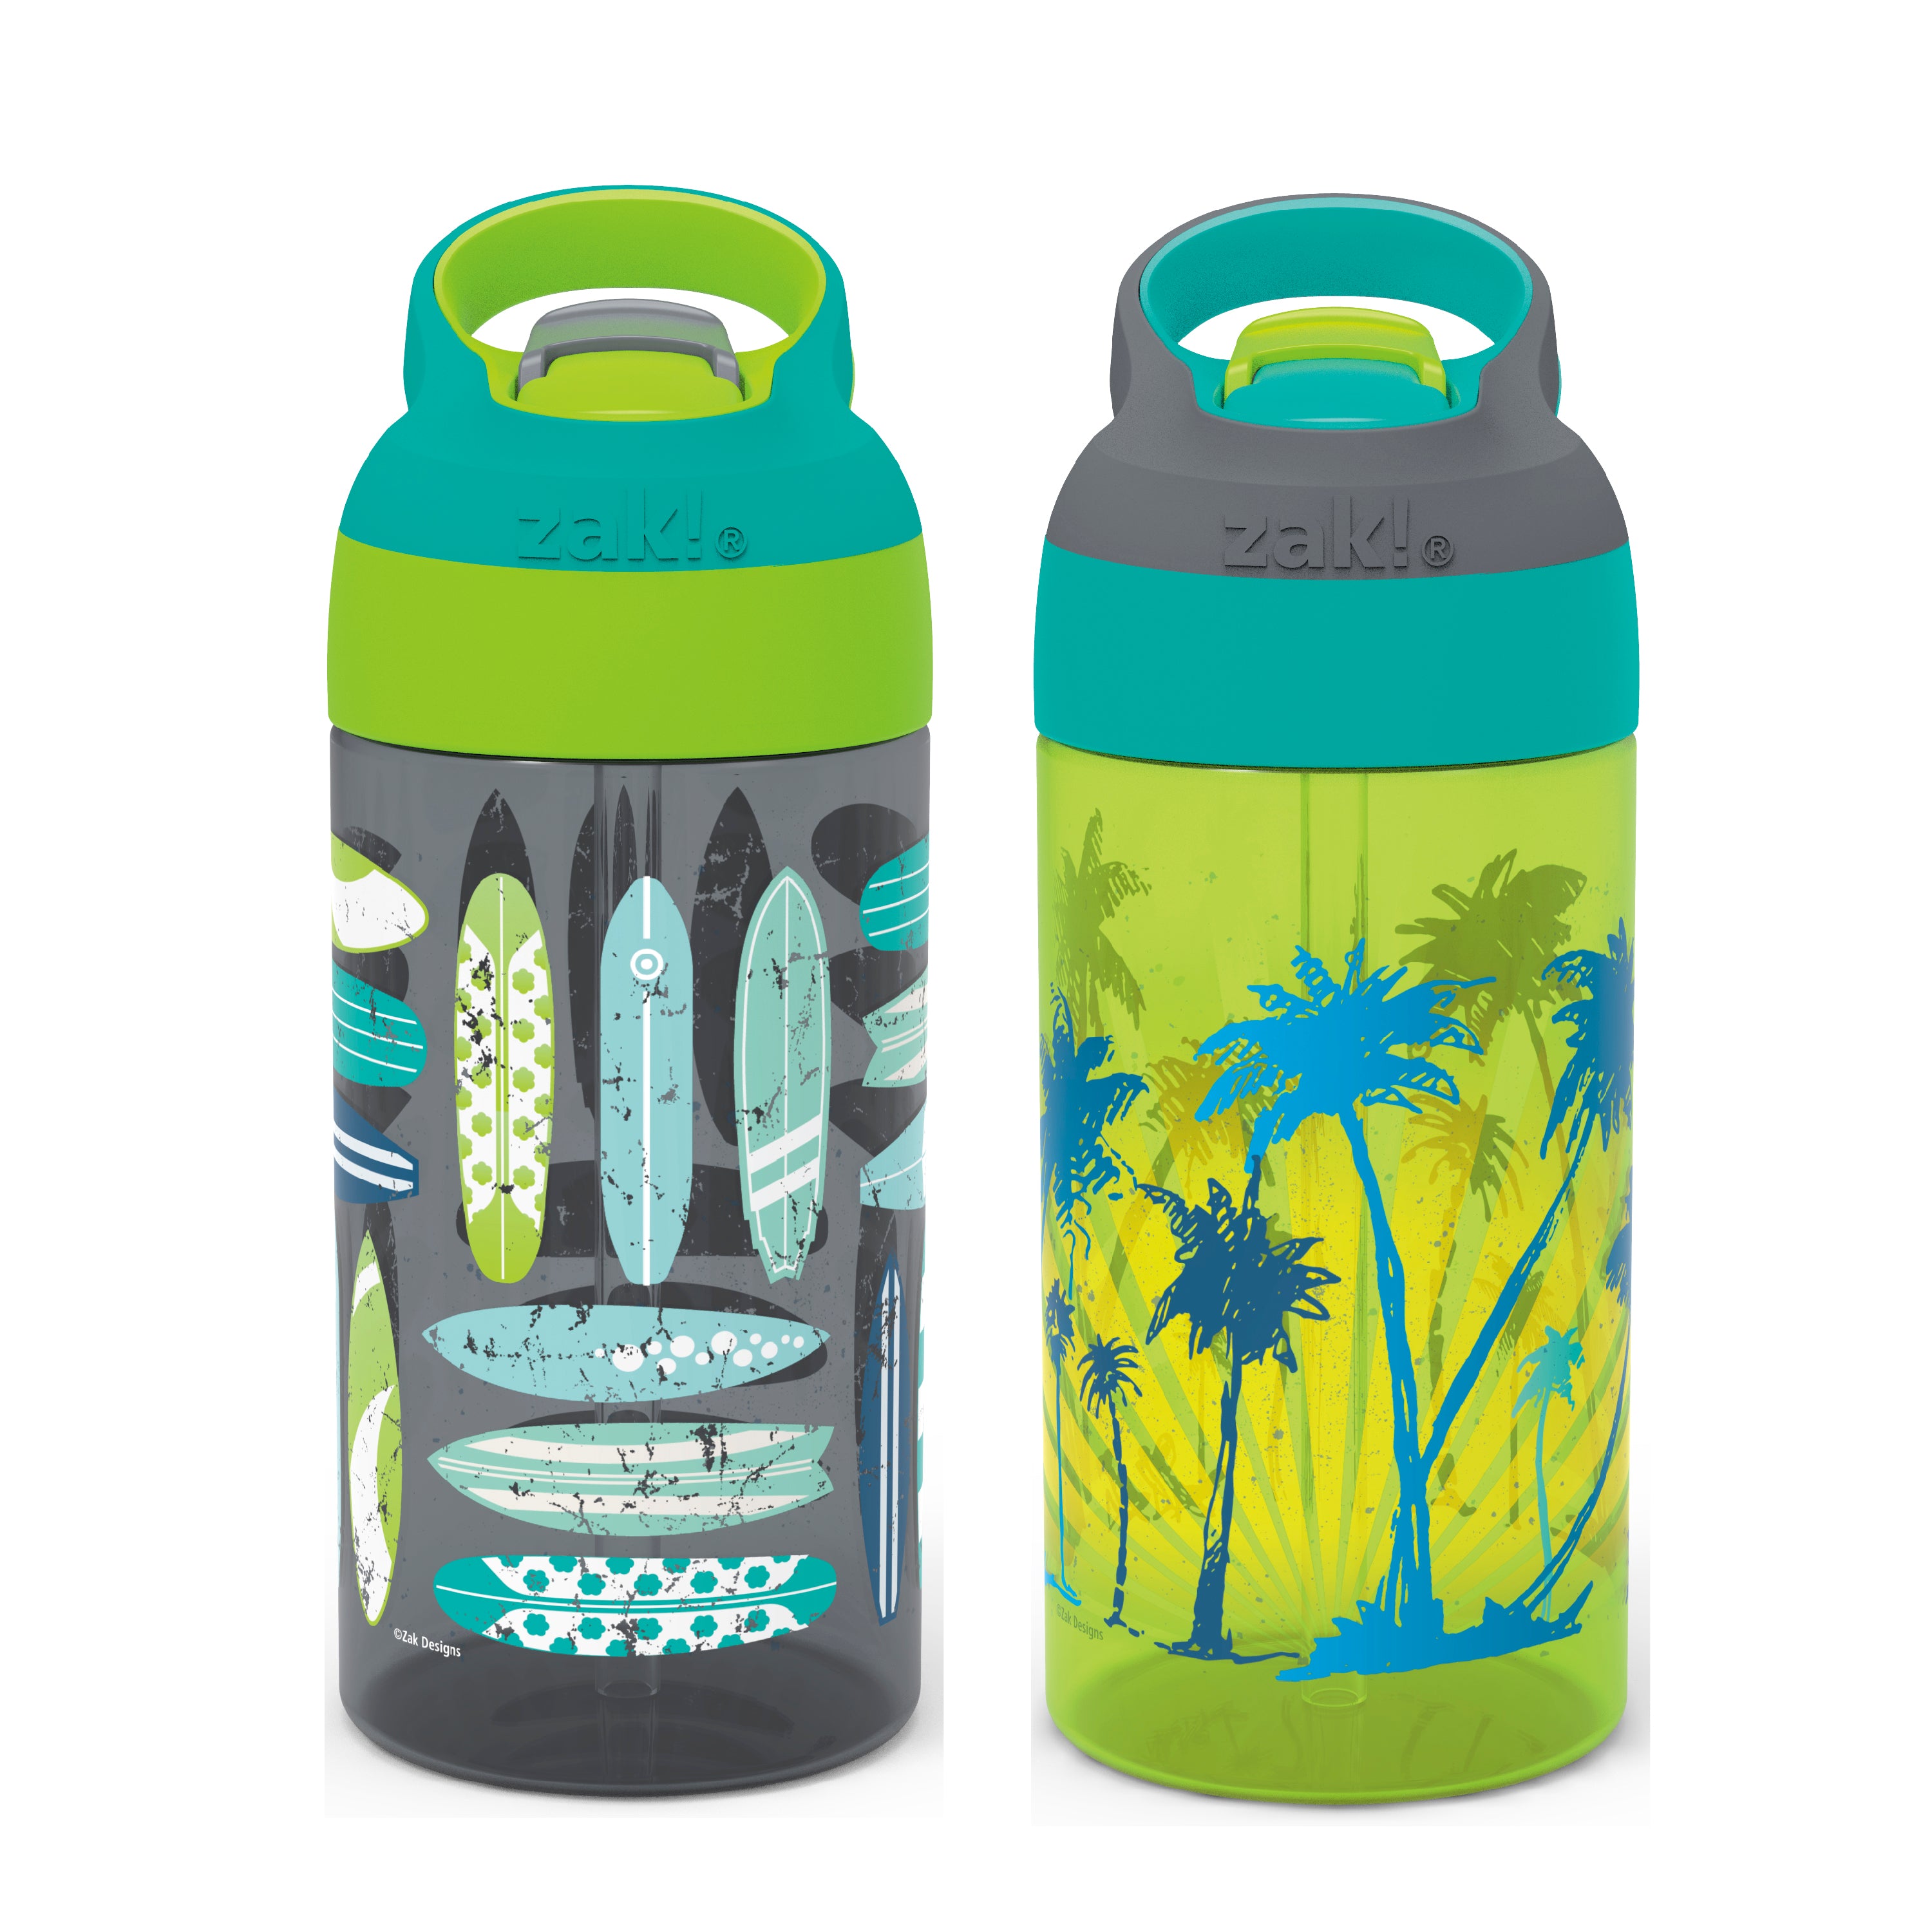 Surfboards and Palm Trees Kids Leak Proof Water Bottles with Push Button Lid and Spout - 16 ounce